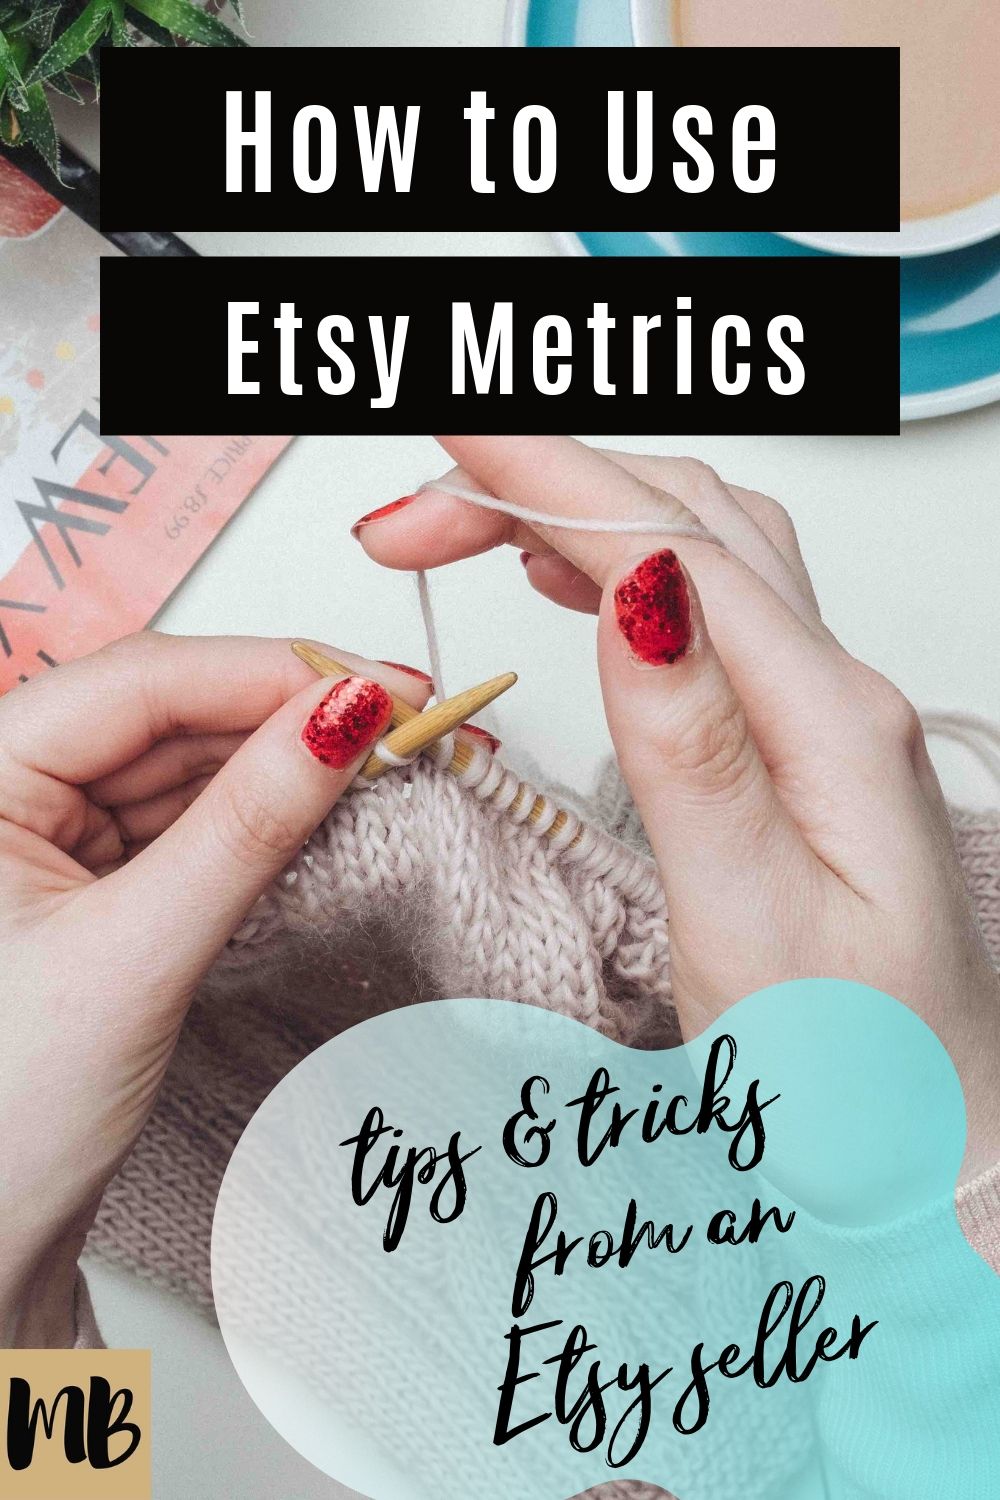 How to use Etsy data and metrics